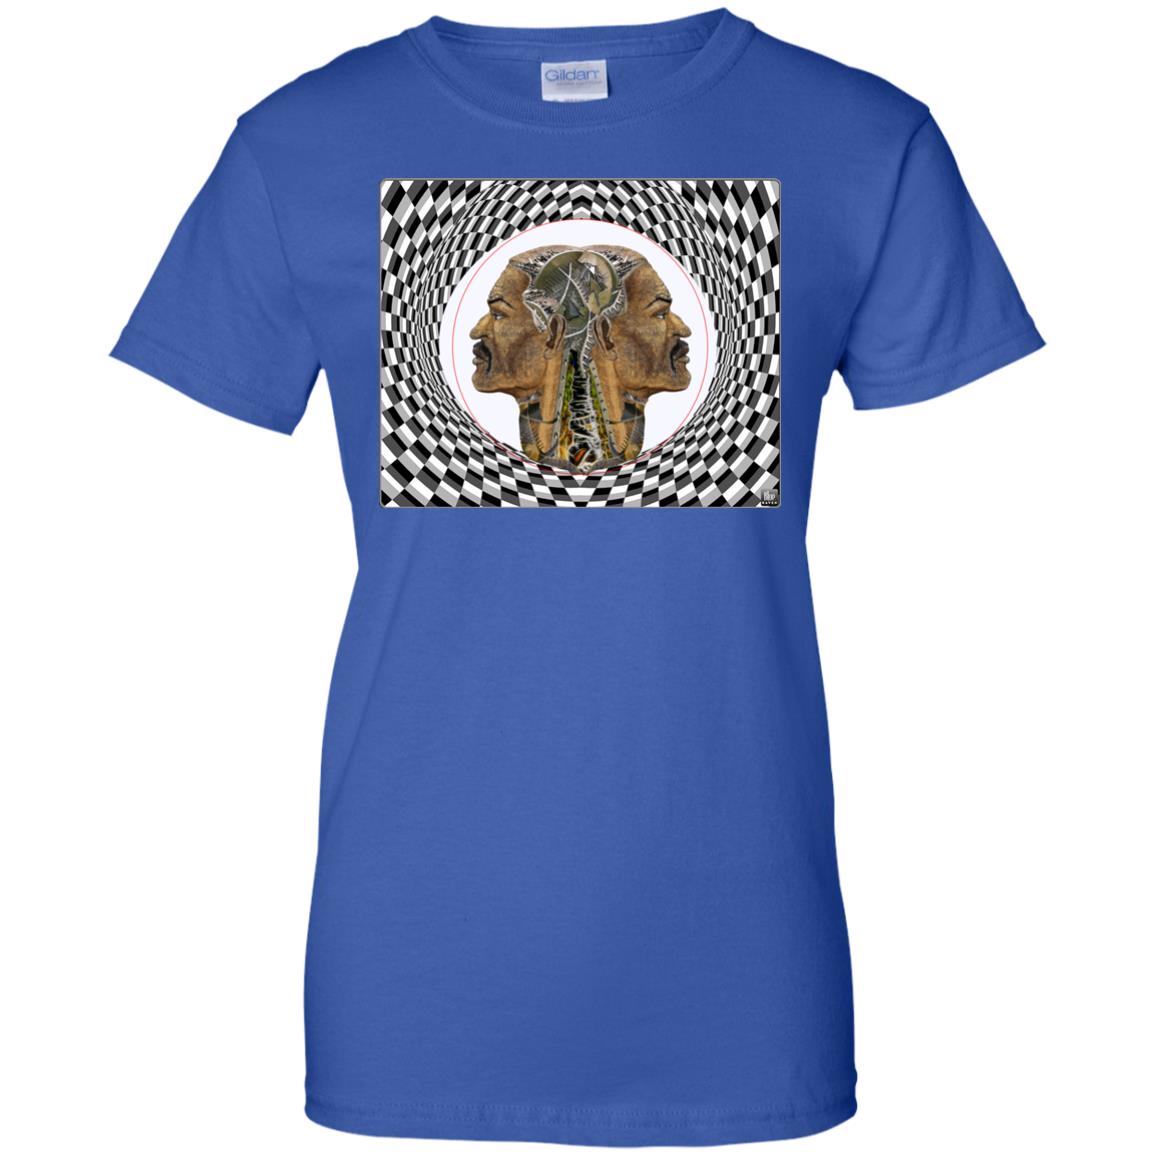 MAN IN THE MACHINE - Women's Relaxed Fit T-Shirt